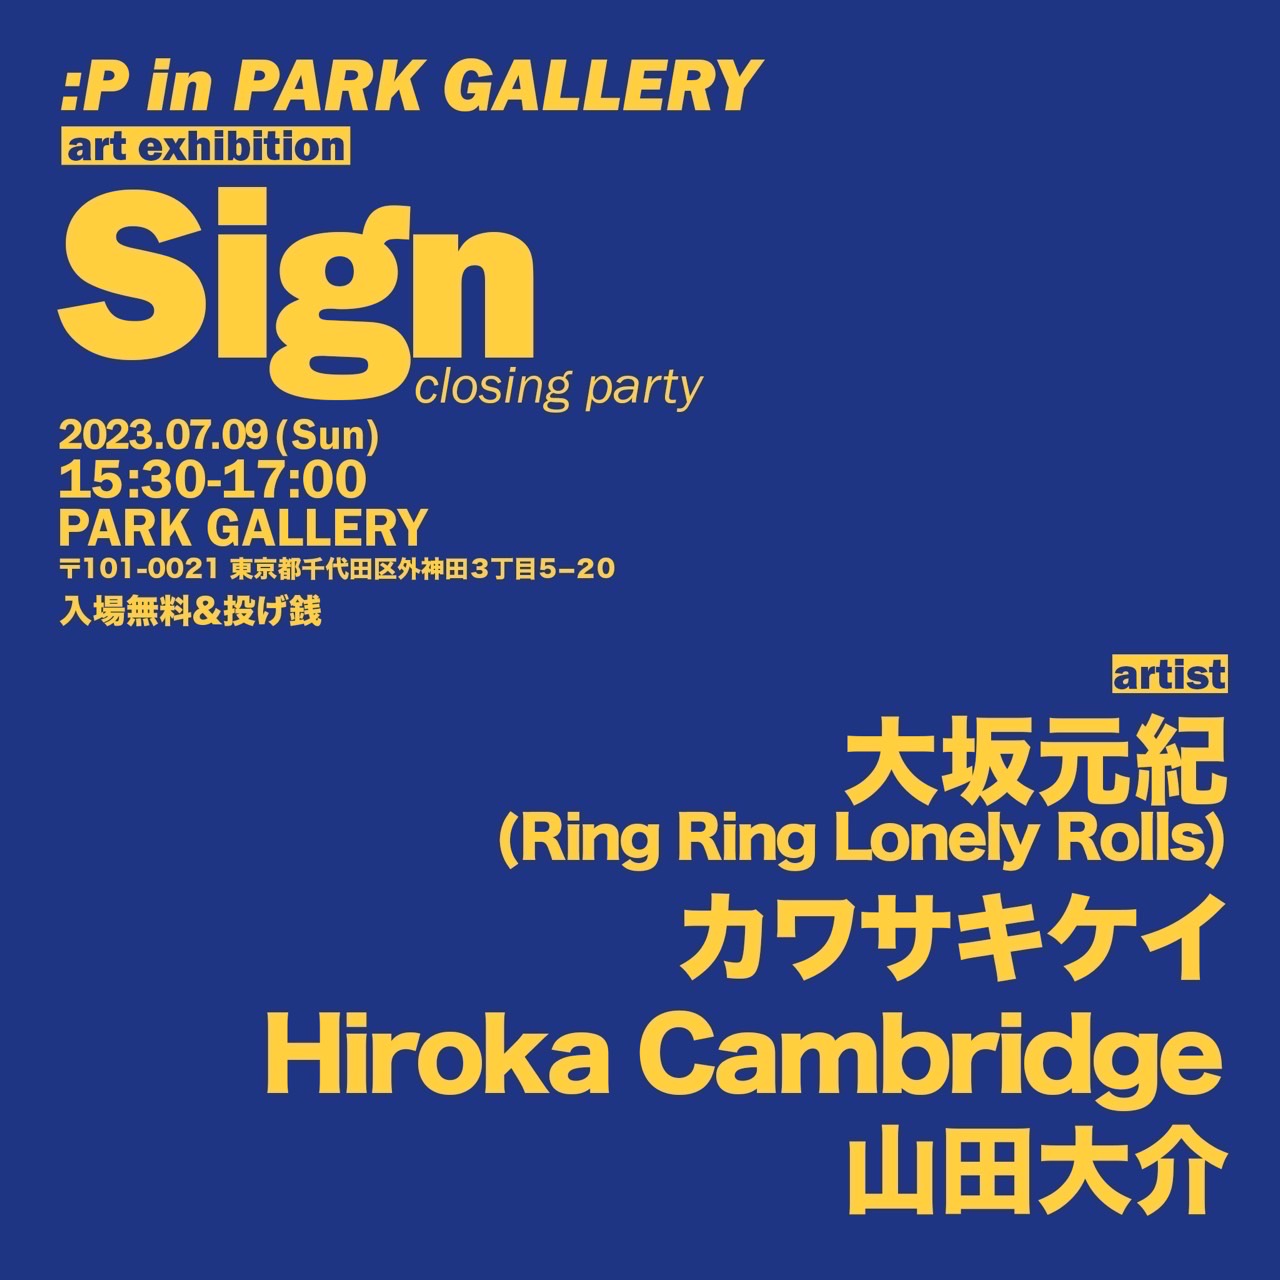 Sign closing party